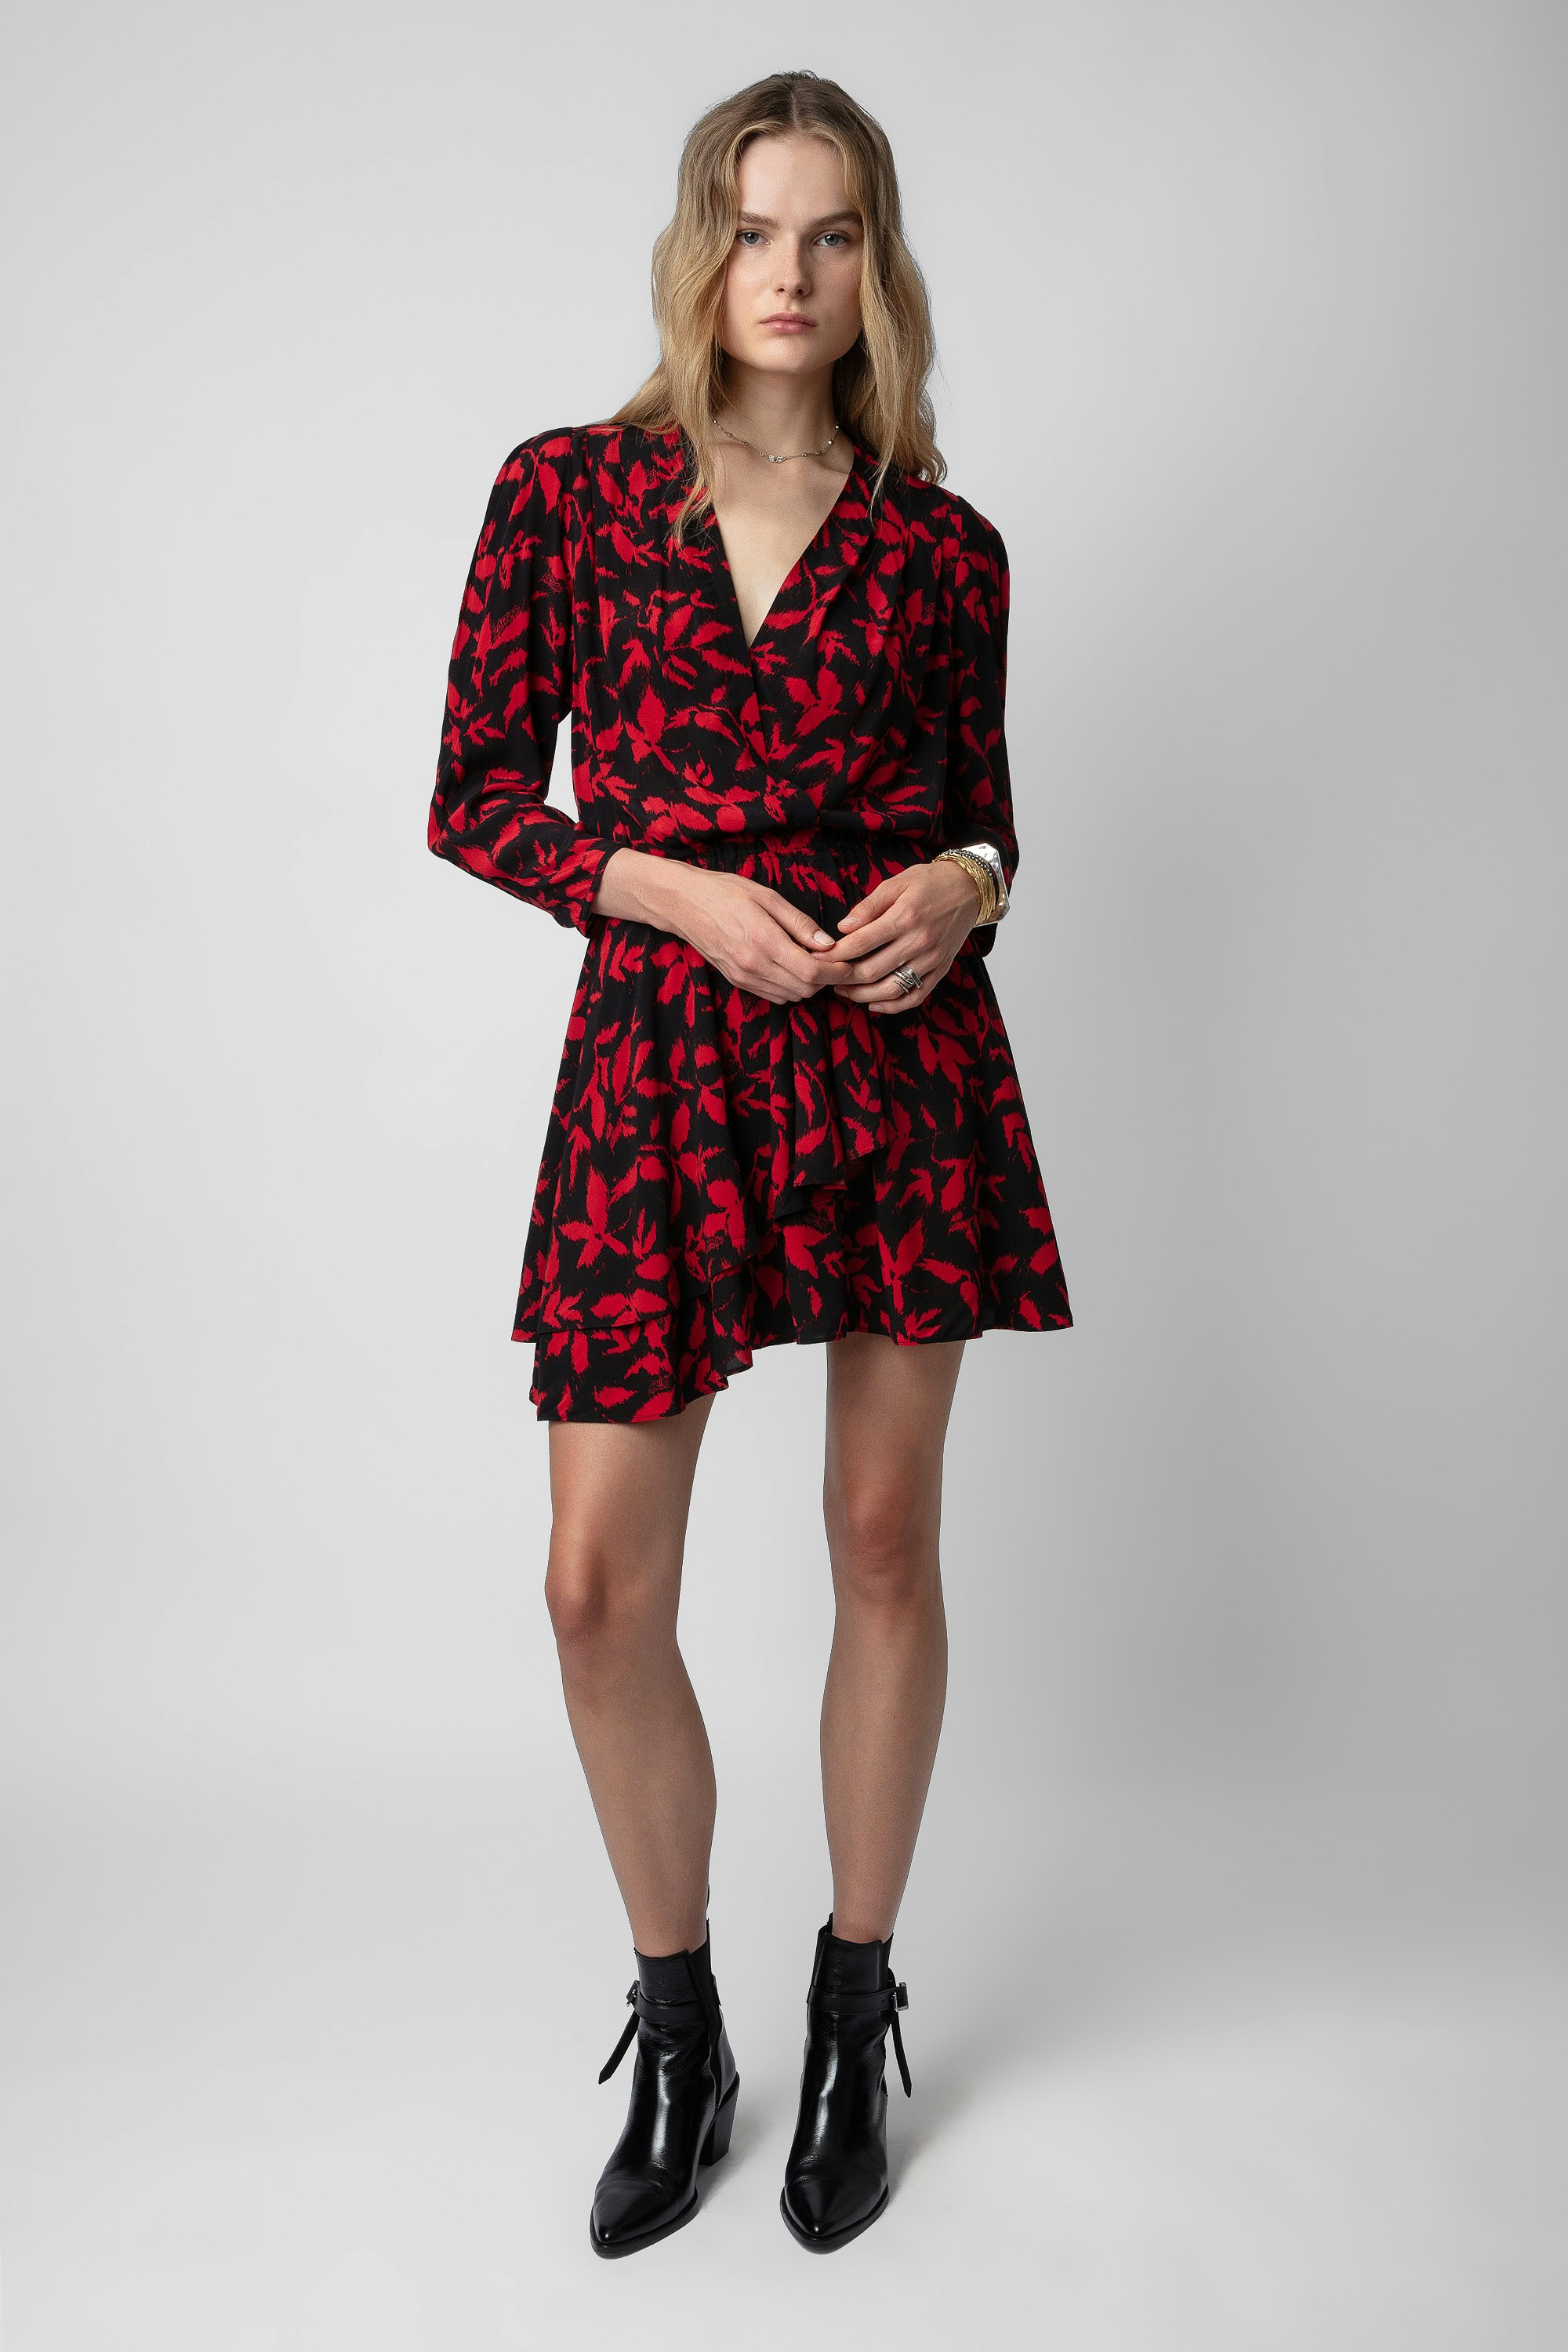 Rogers Dress - Women’s short black floral-print dress with pleated skirt.